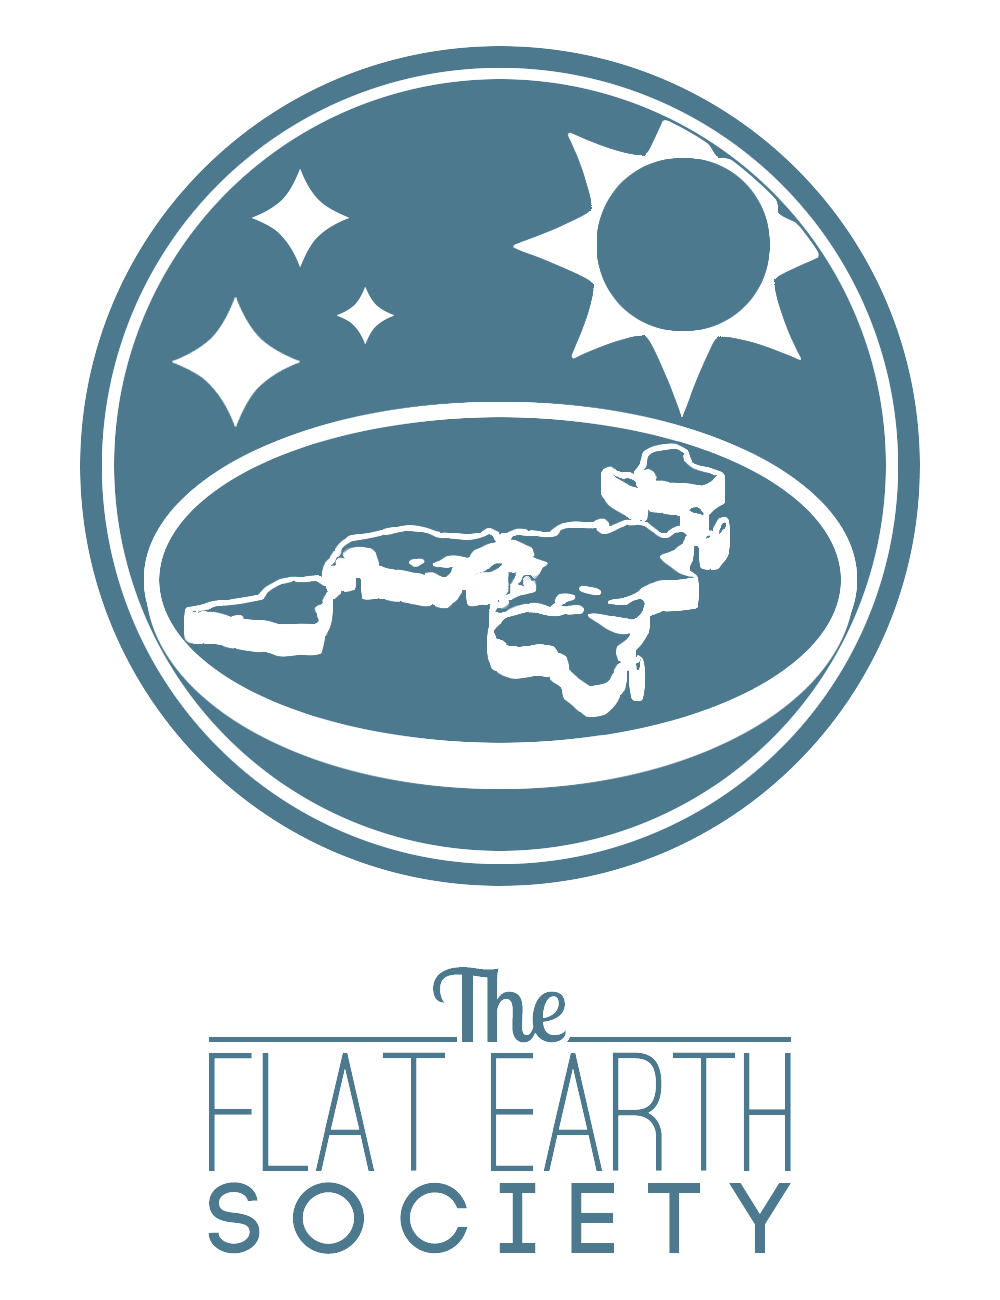 Image result for flat earth